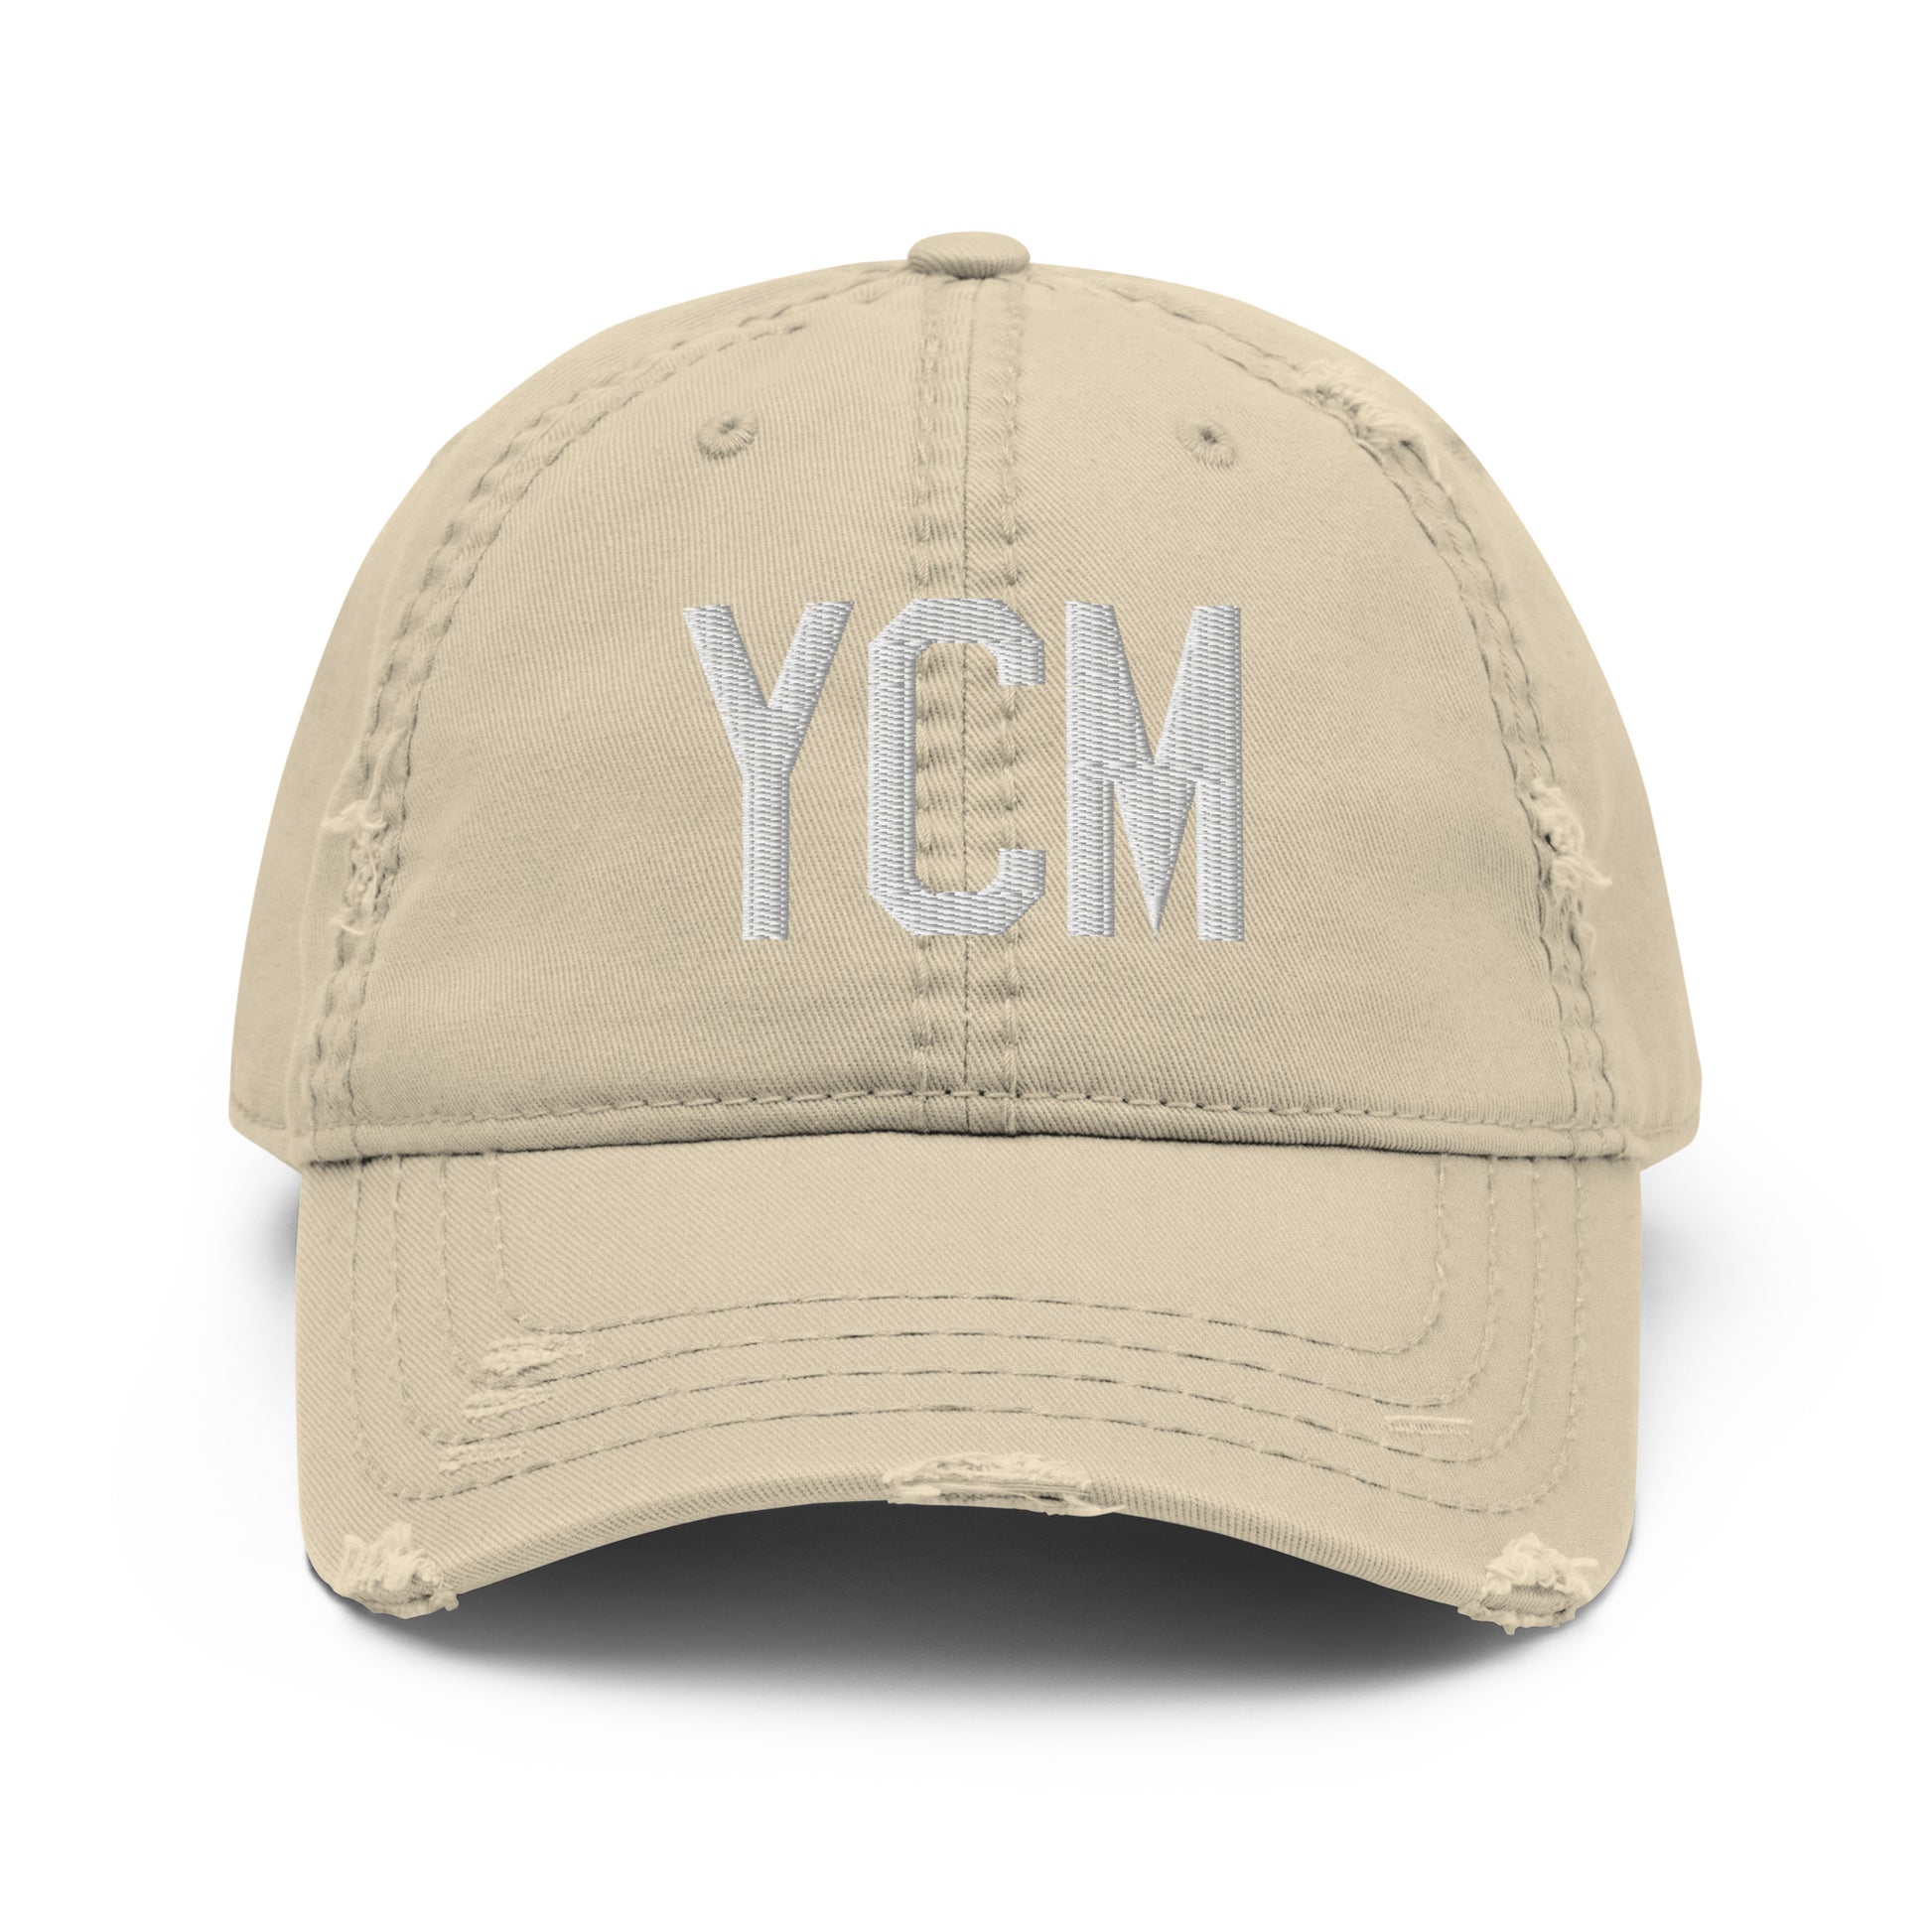 Airport Code Distressed Hat - White • YCM St. Catharines • YHM Designs - Image 18